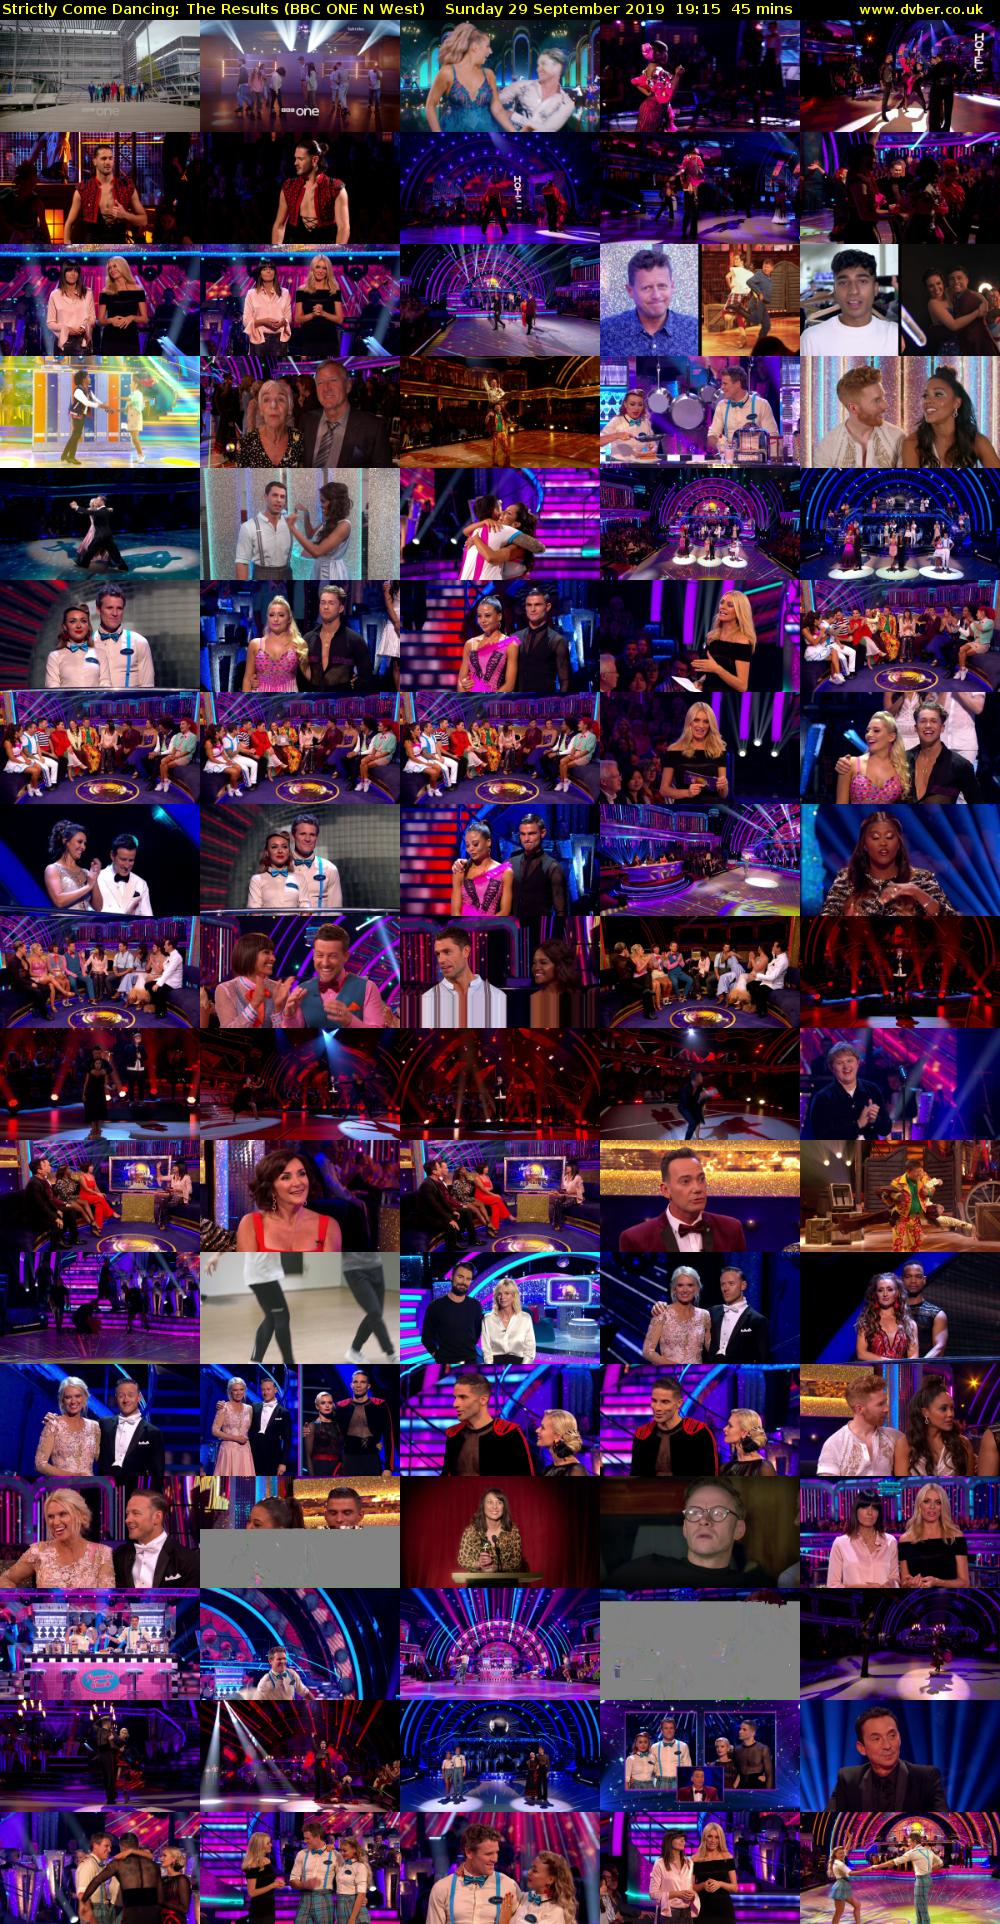 Strictly Come Dancing: The Results (BBC ONE N West) Sunday 29 September 2019 19:15 - 20:00